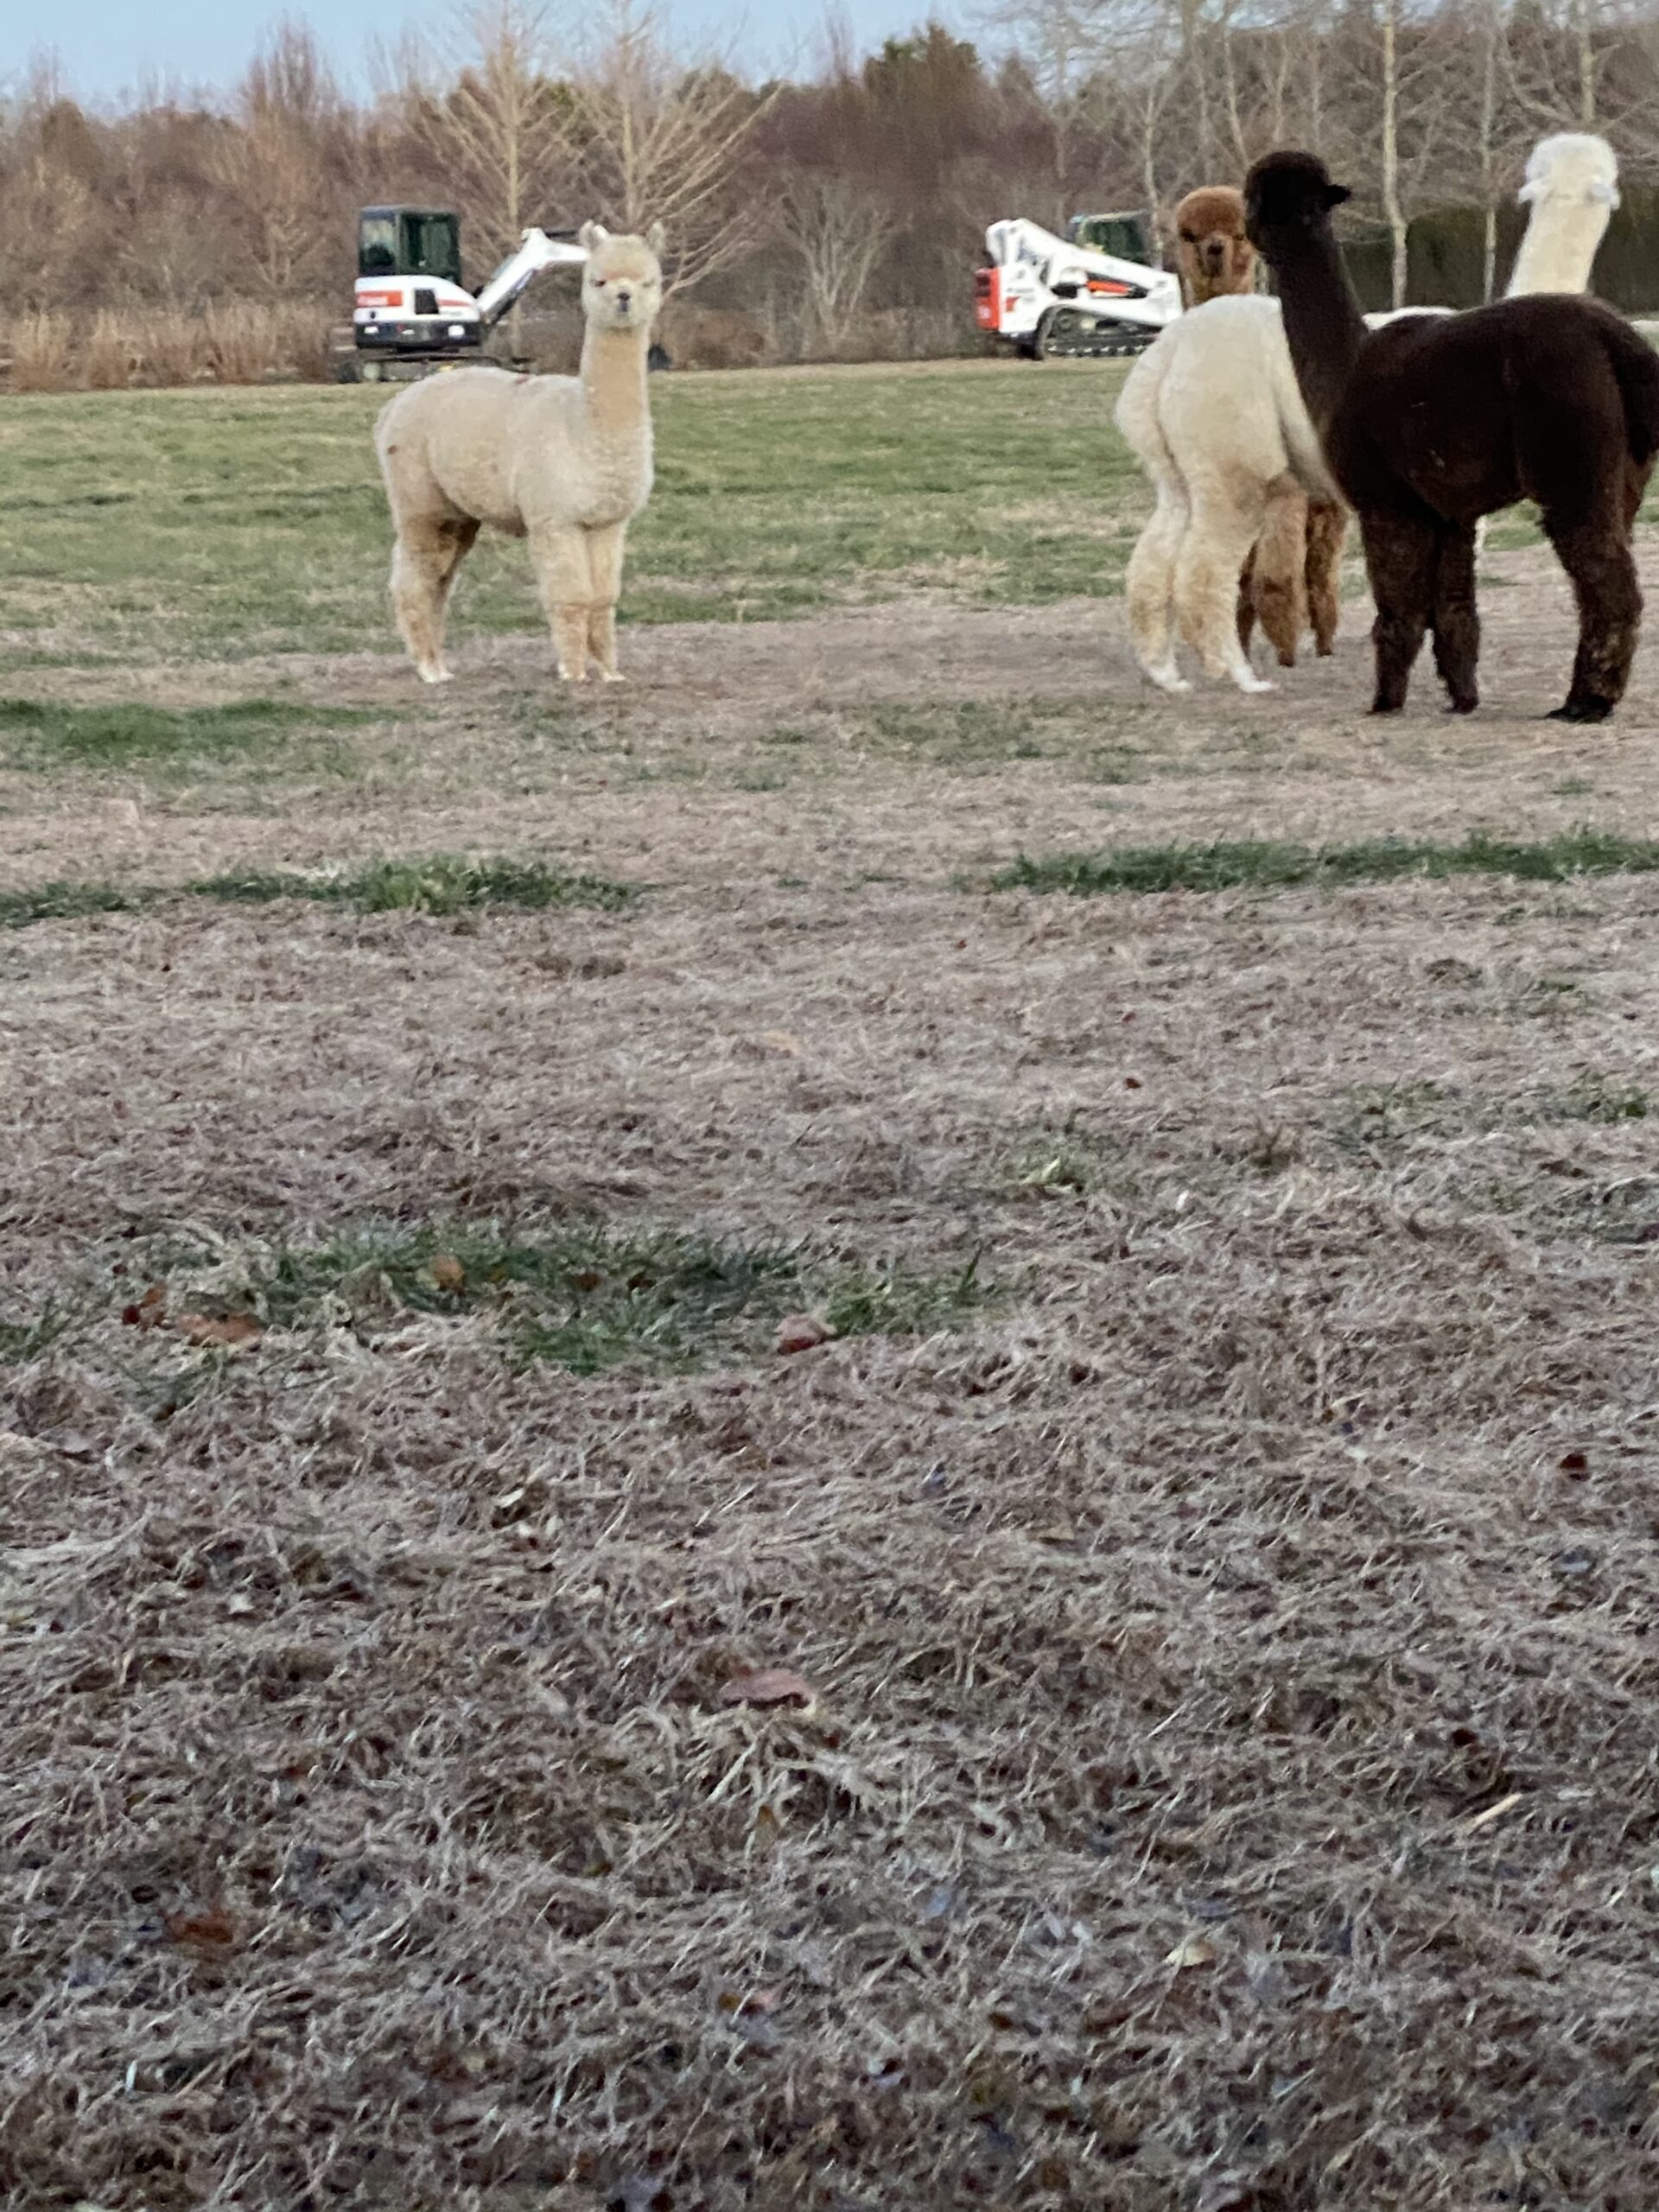 The alpacas on the reserve.